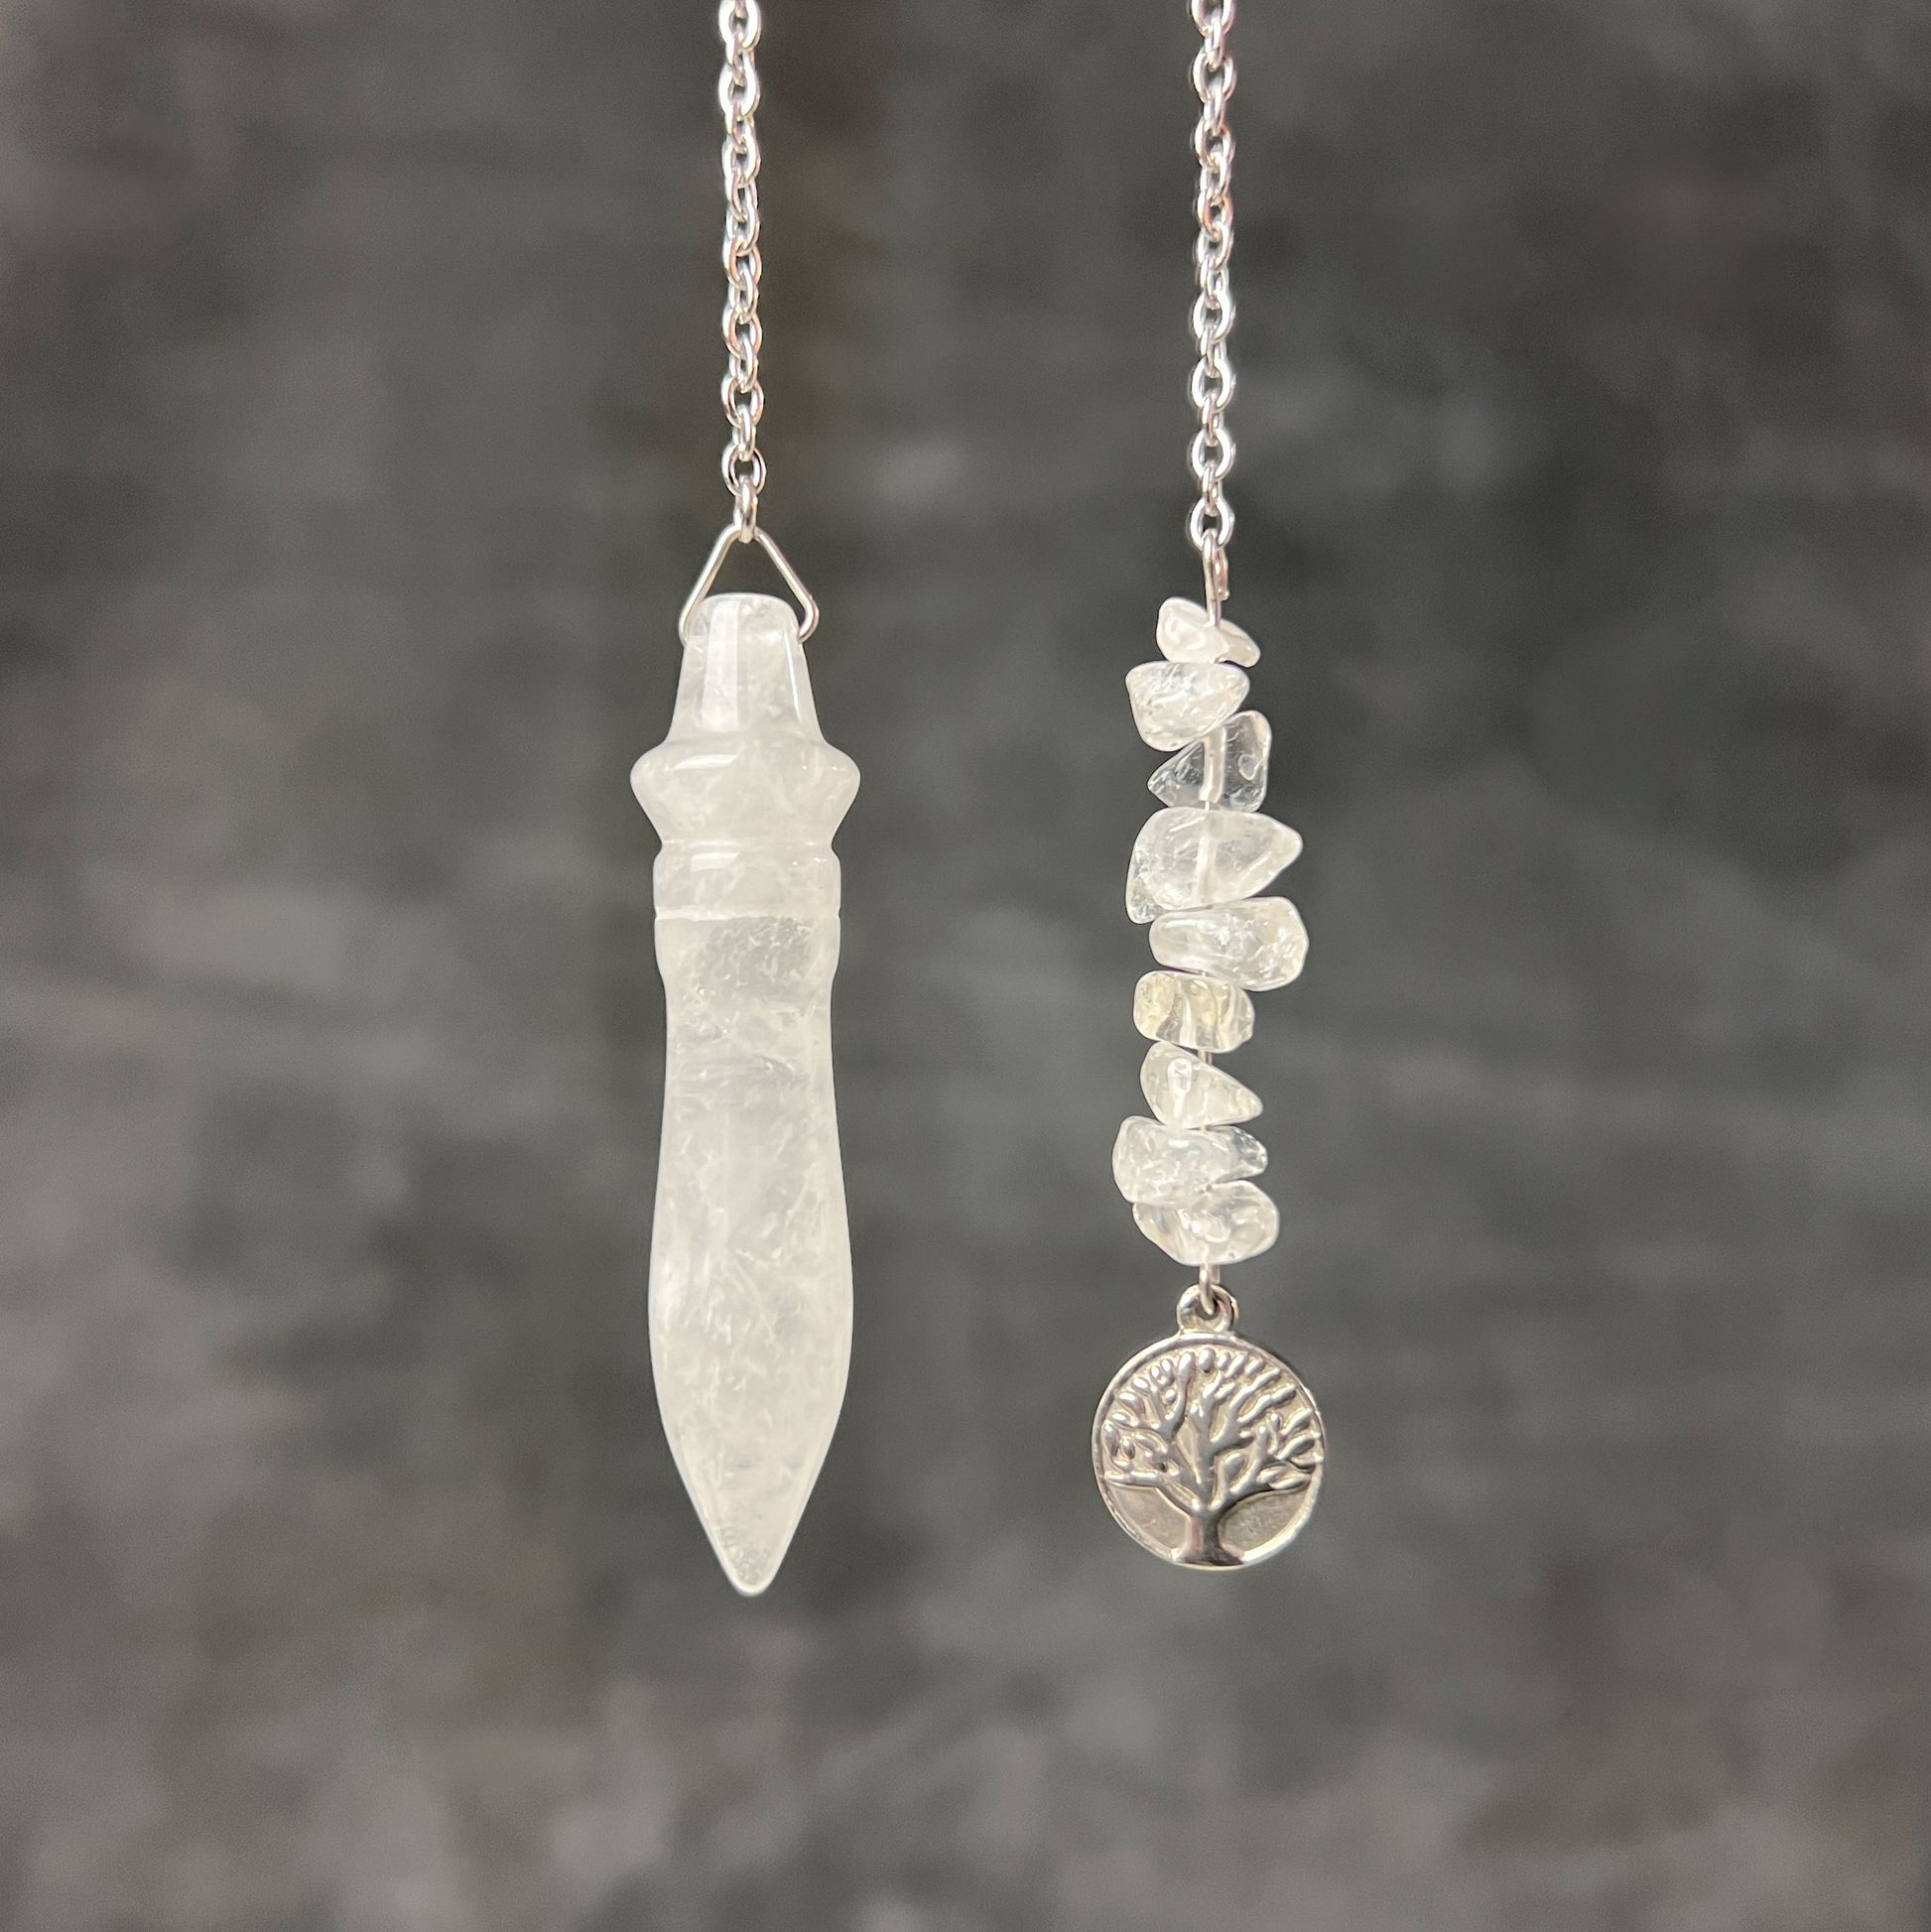 Egyptian Thot pendulum clear quartz and stainless steel, tree of life charm Baguette Magick